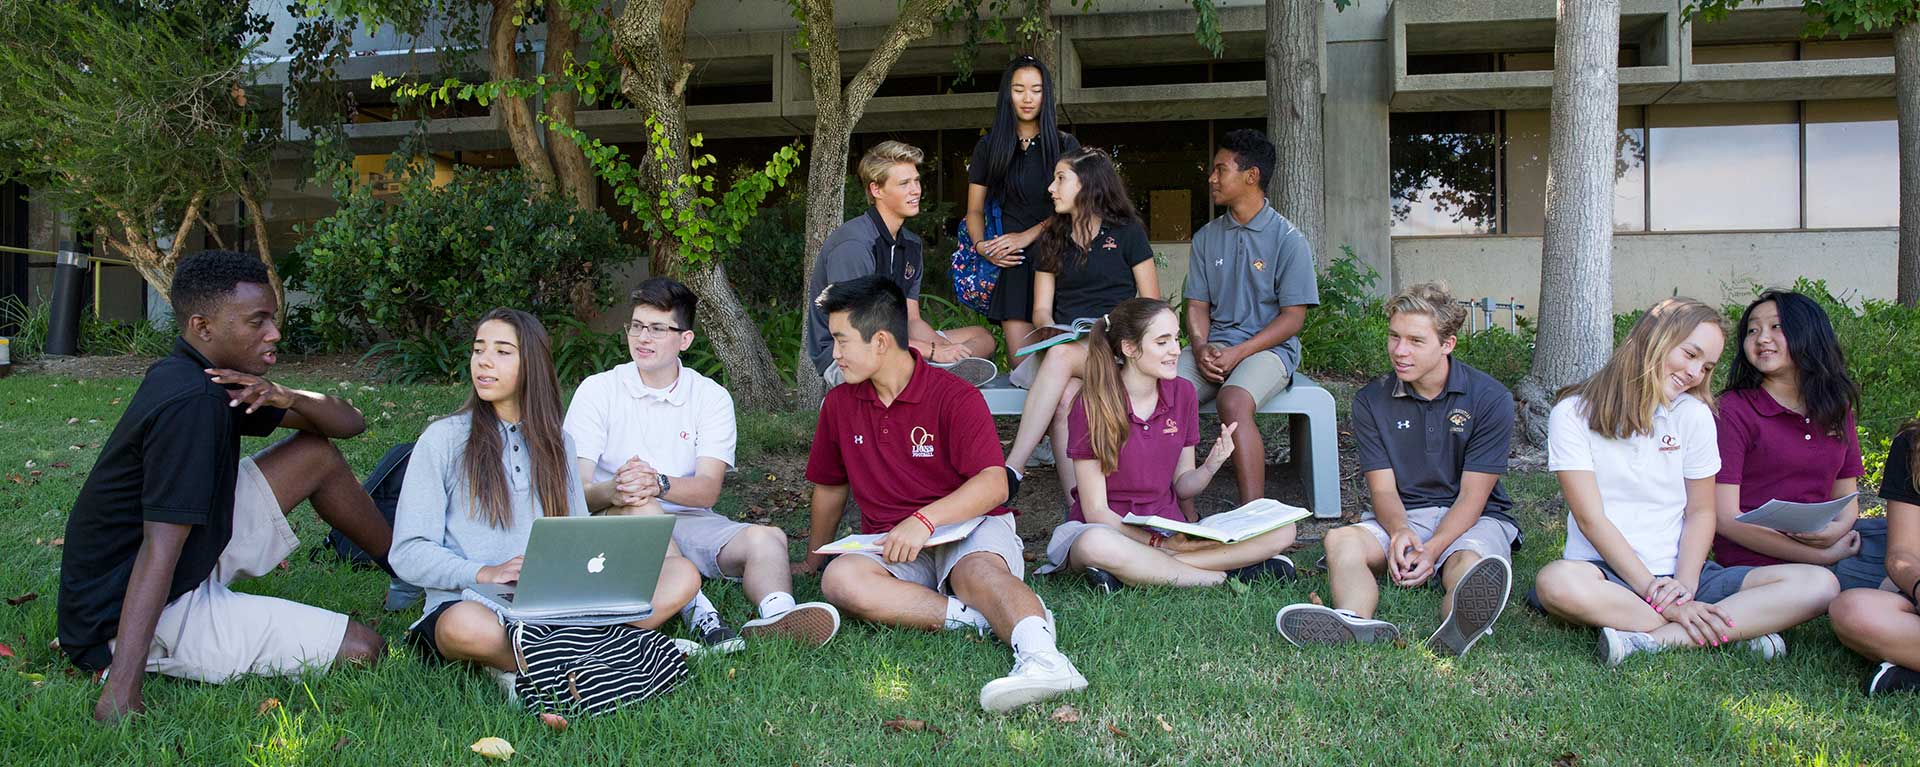 Oaks Christian, a boarding school for girls and boys looking to reach their highest potential